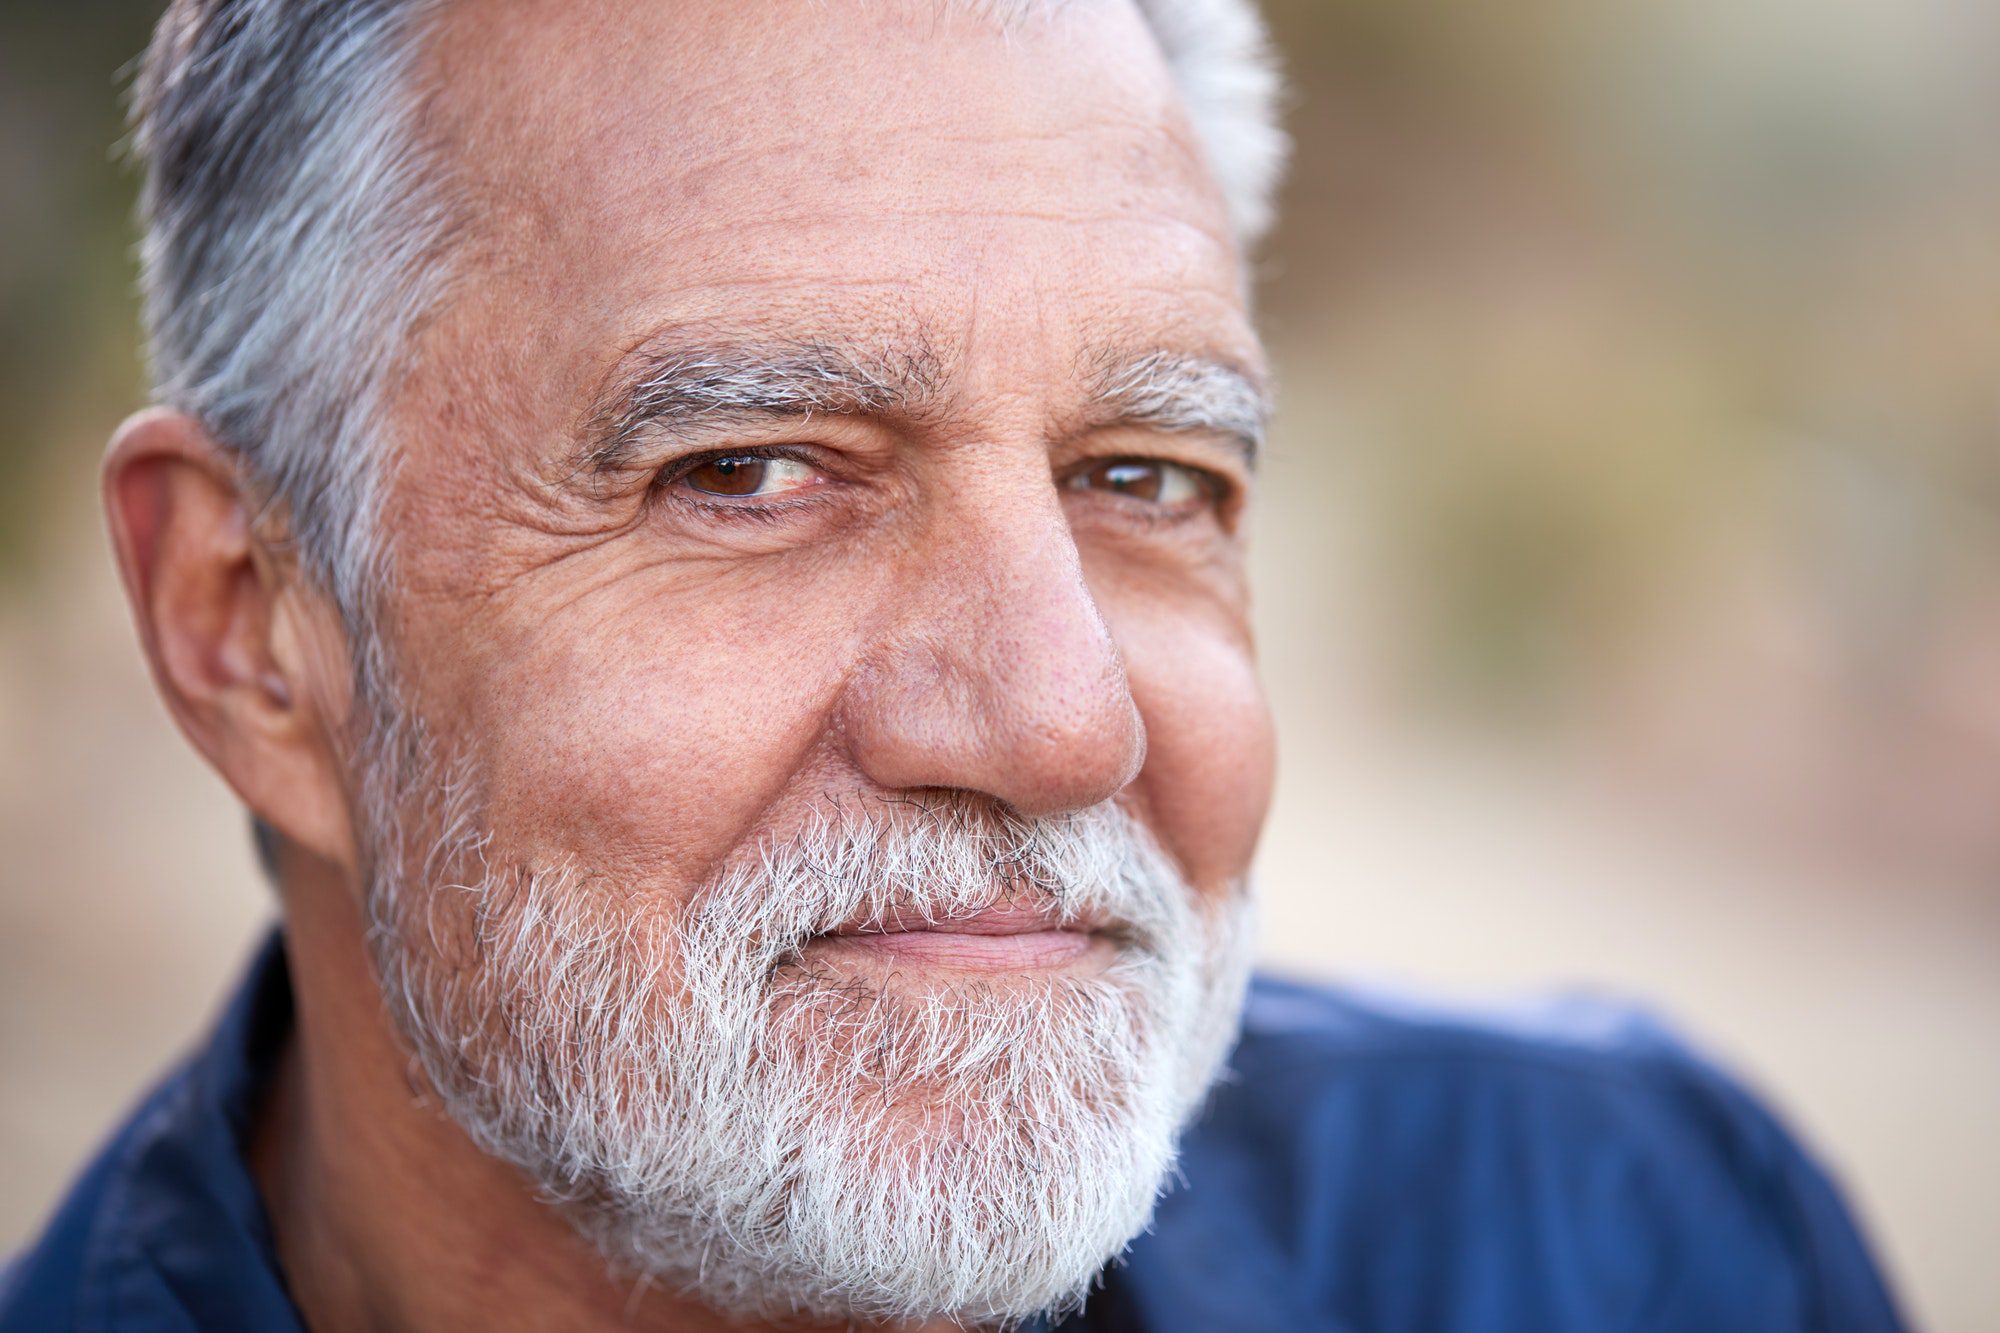 outdoor portrait of serious hispanic senior man with mental health concerns